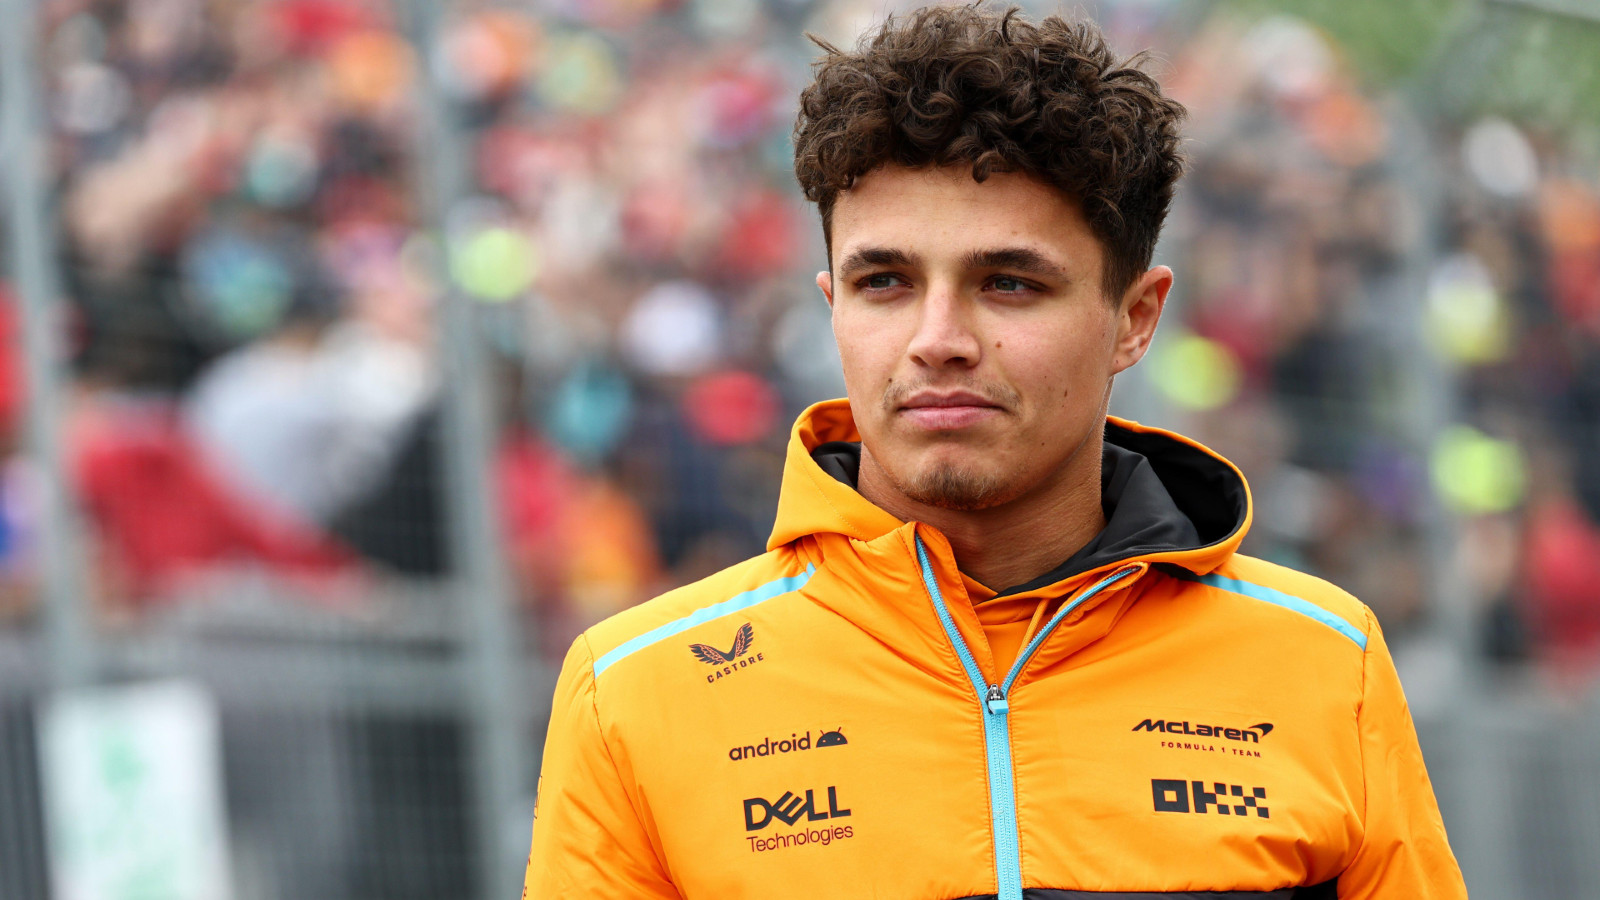 Why Lando Norris 'loves reading bad things' about himself on social